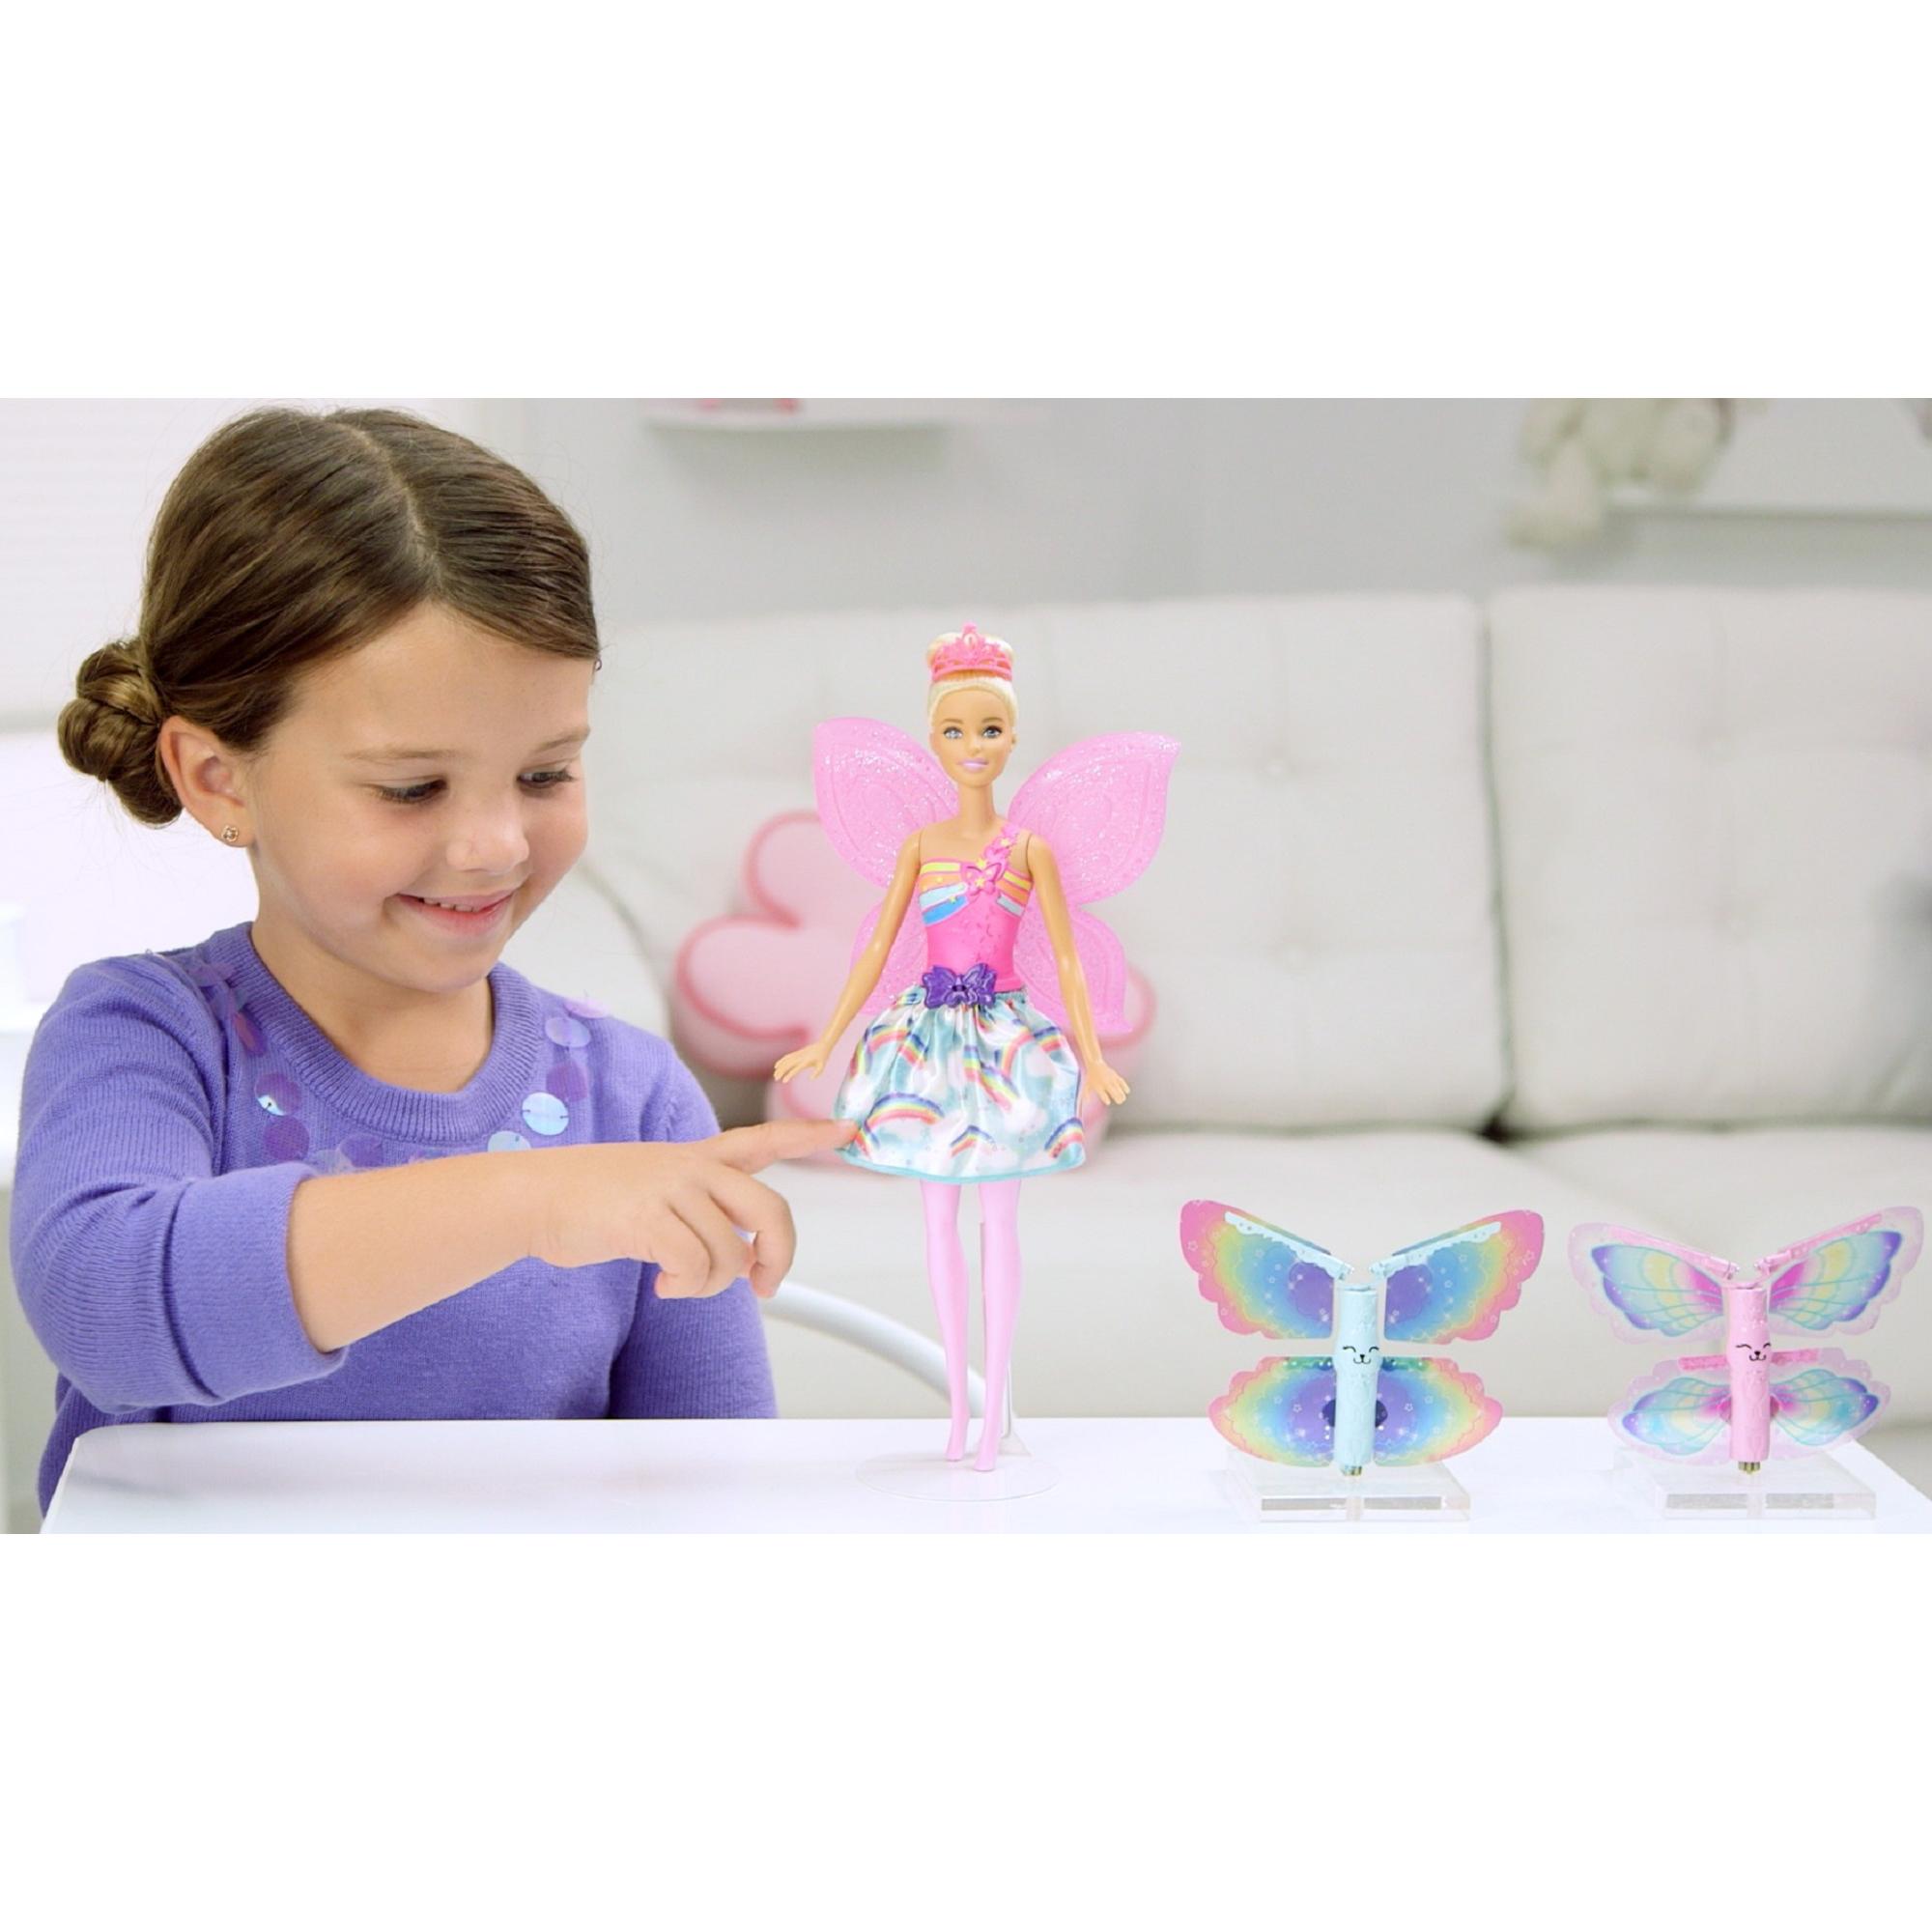 Barbie Dreamtopia Flying Wings Fairy Doll with Blonde Hair - image 3 of 11